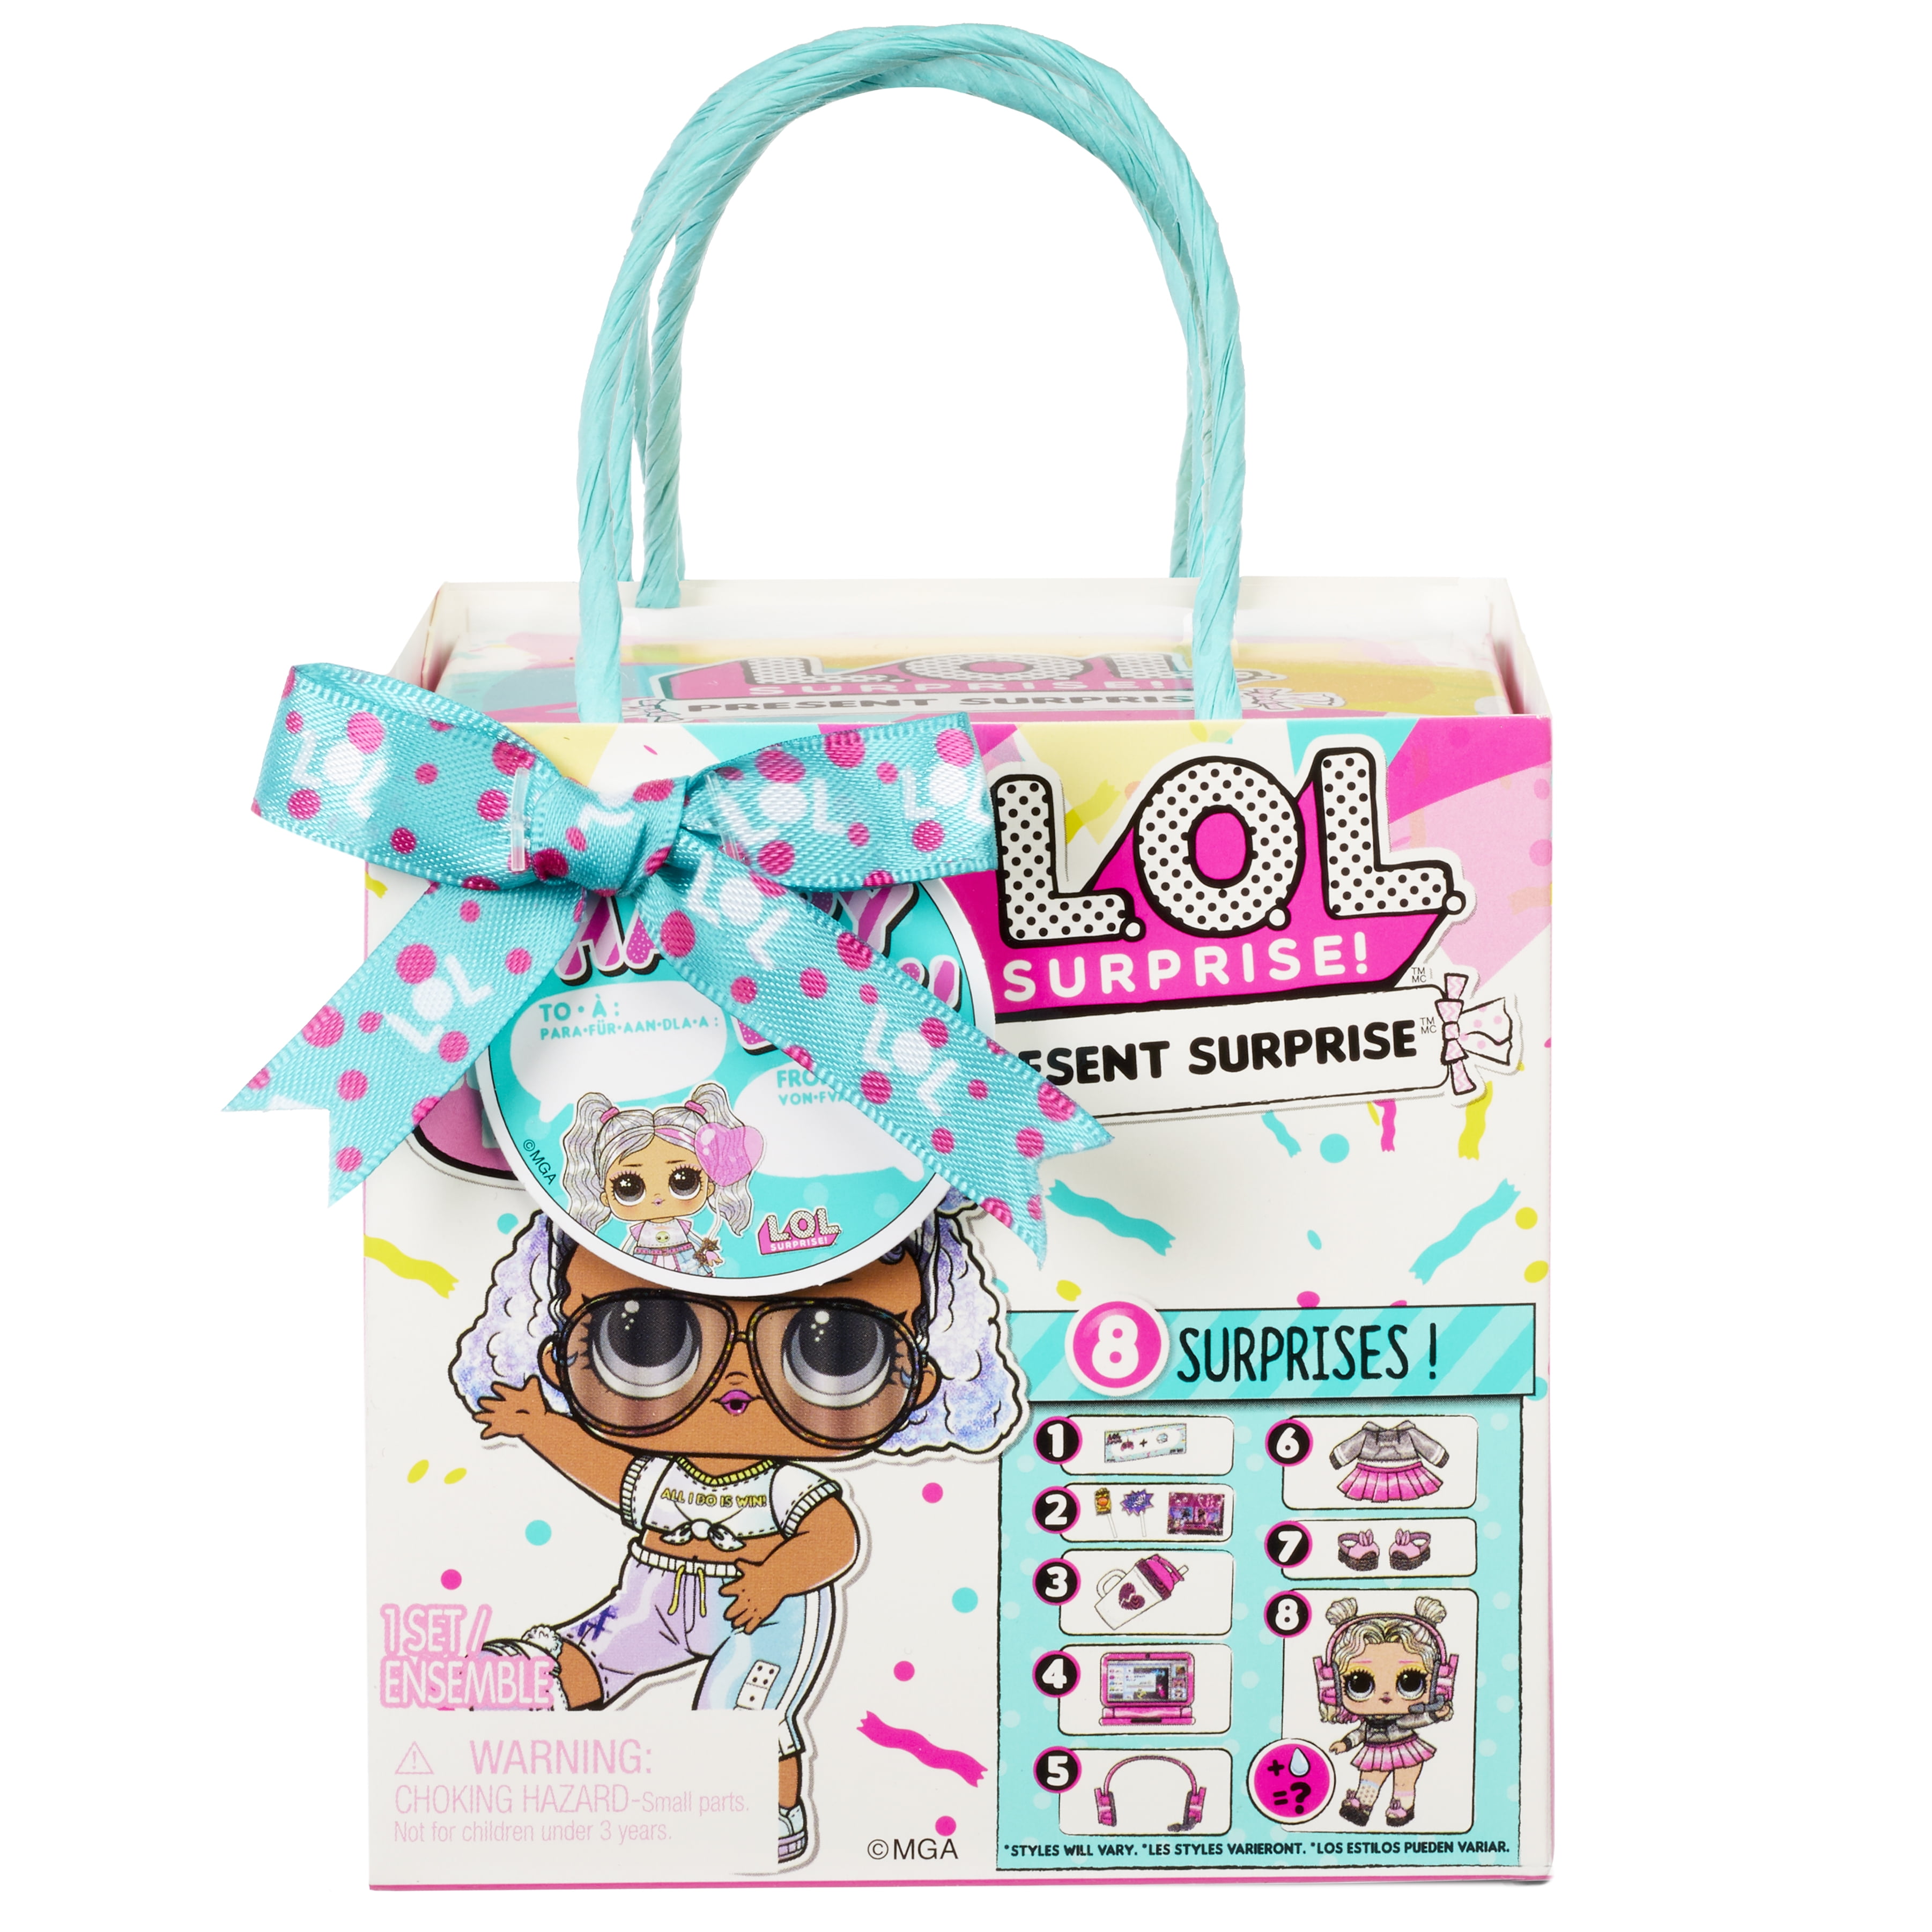 L.O.L Surprise! LOL Surprise Present Surprise Series 3 Birthday Month Theme, Great Gift for Kids Ages 4 5 6+